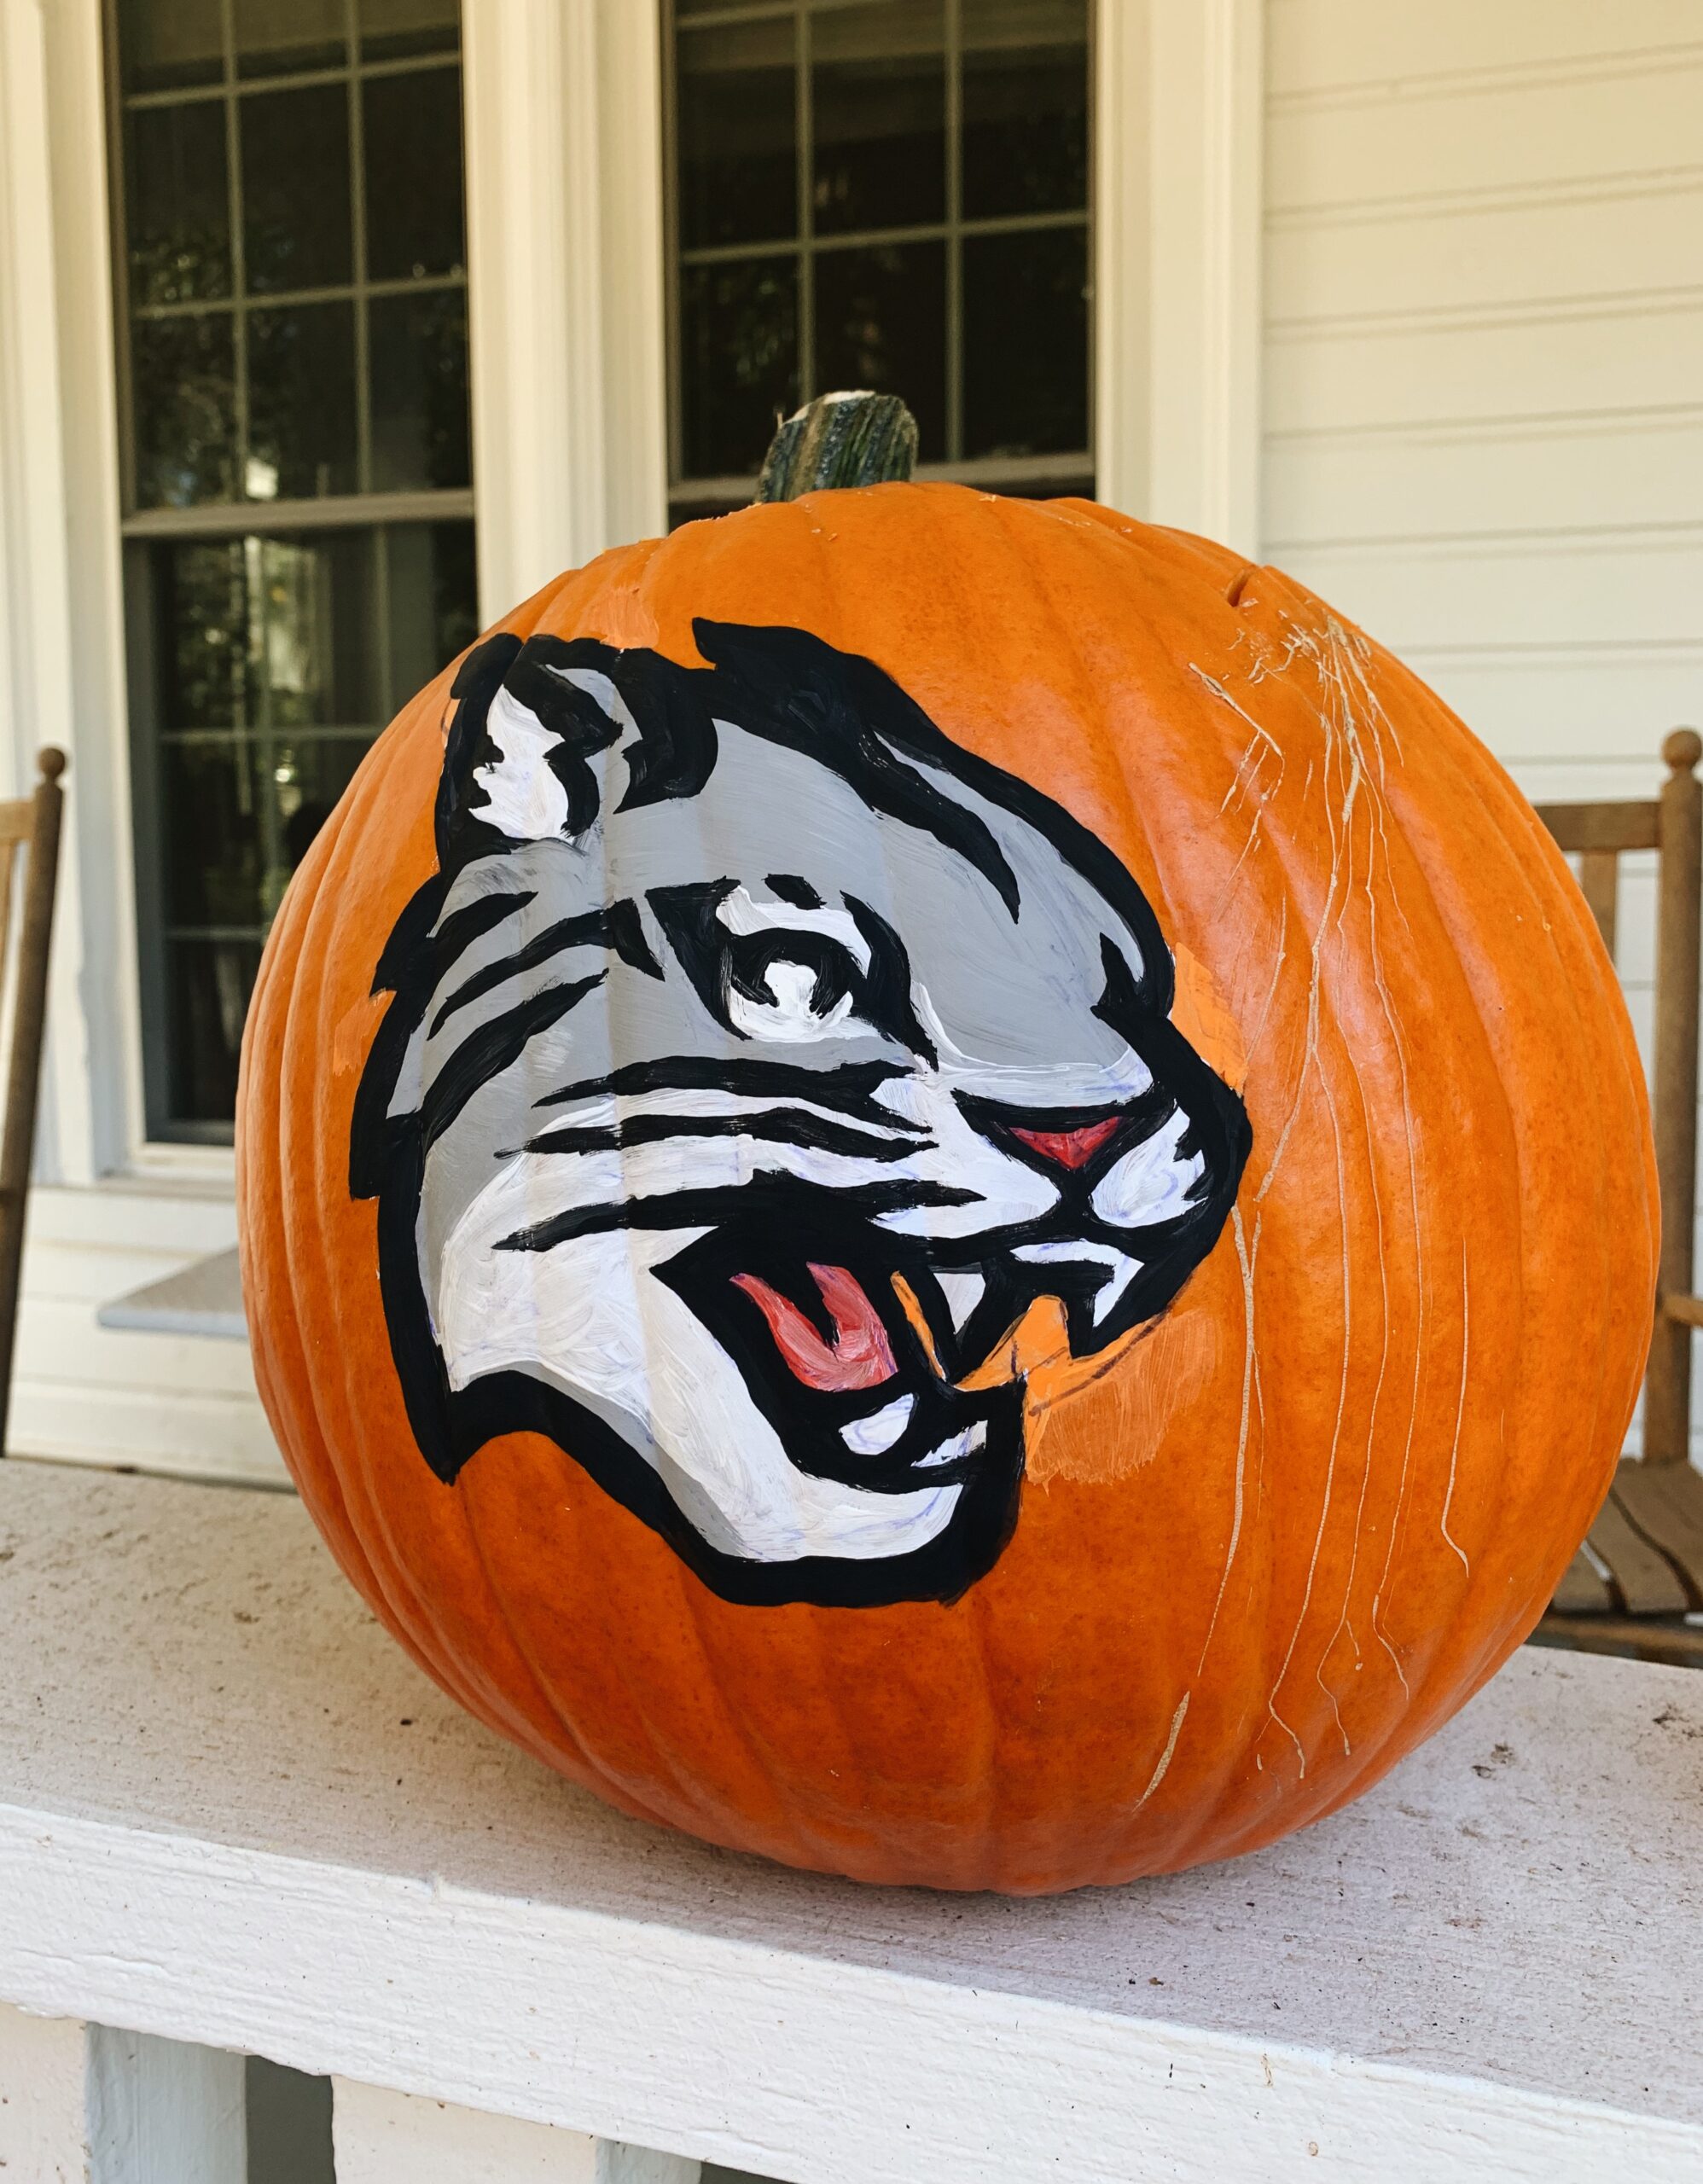 an orange pumpkin with a grey wildcat painted on it